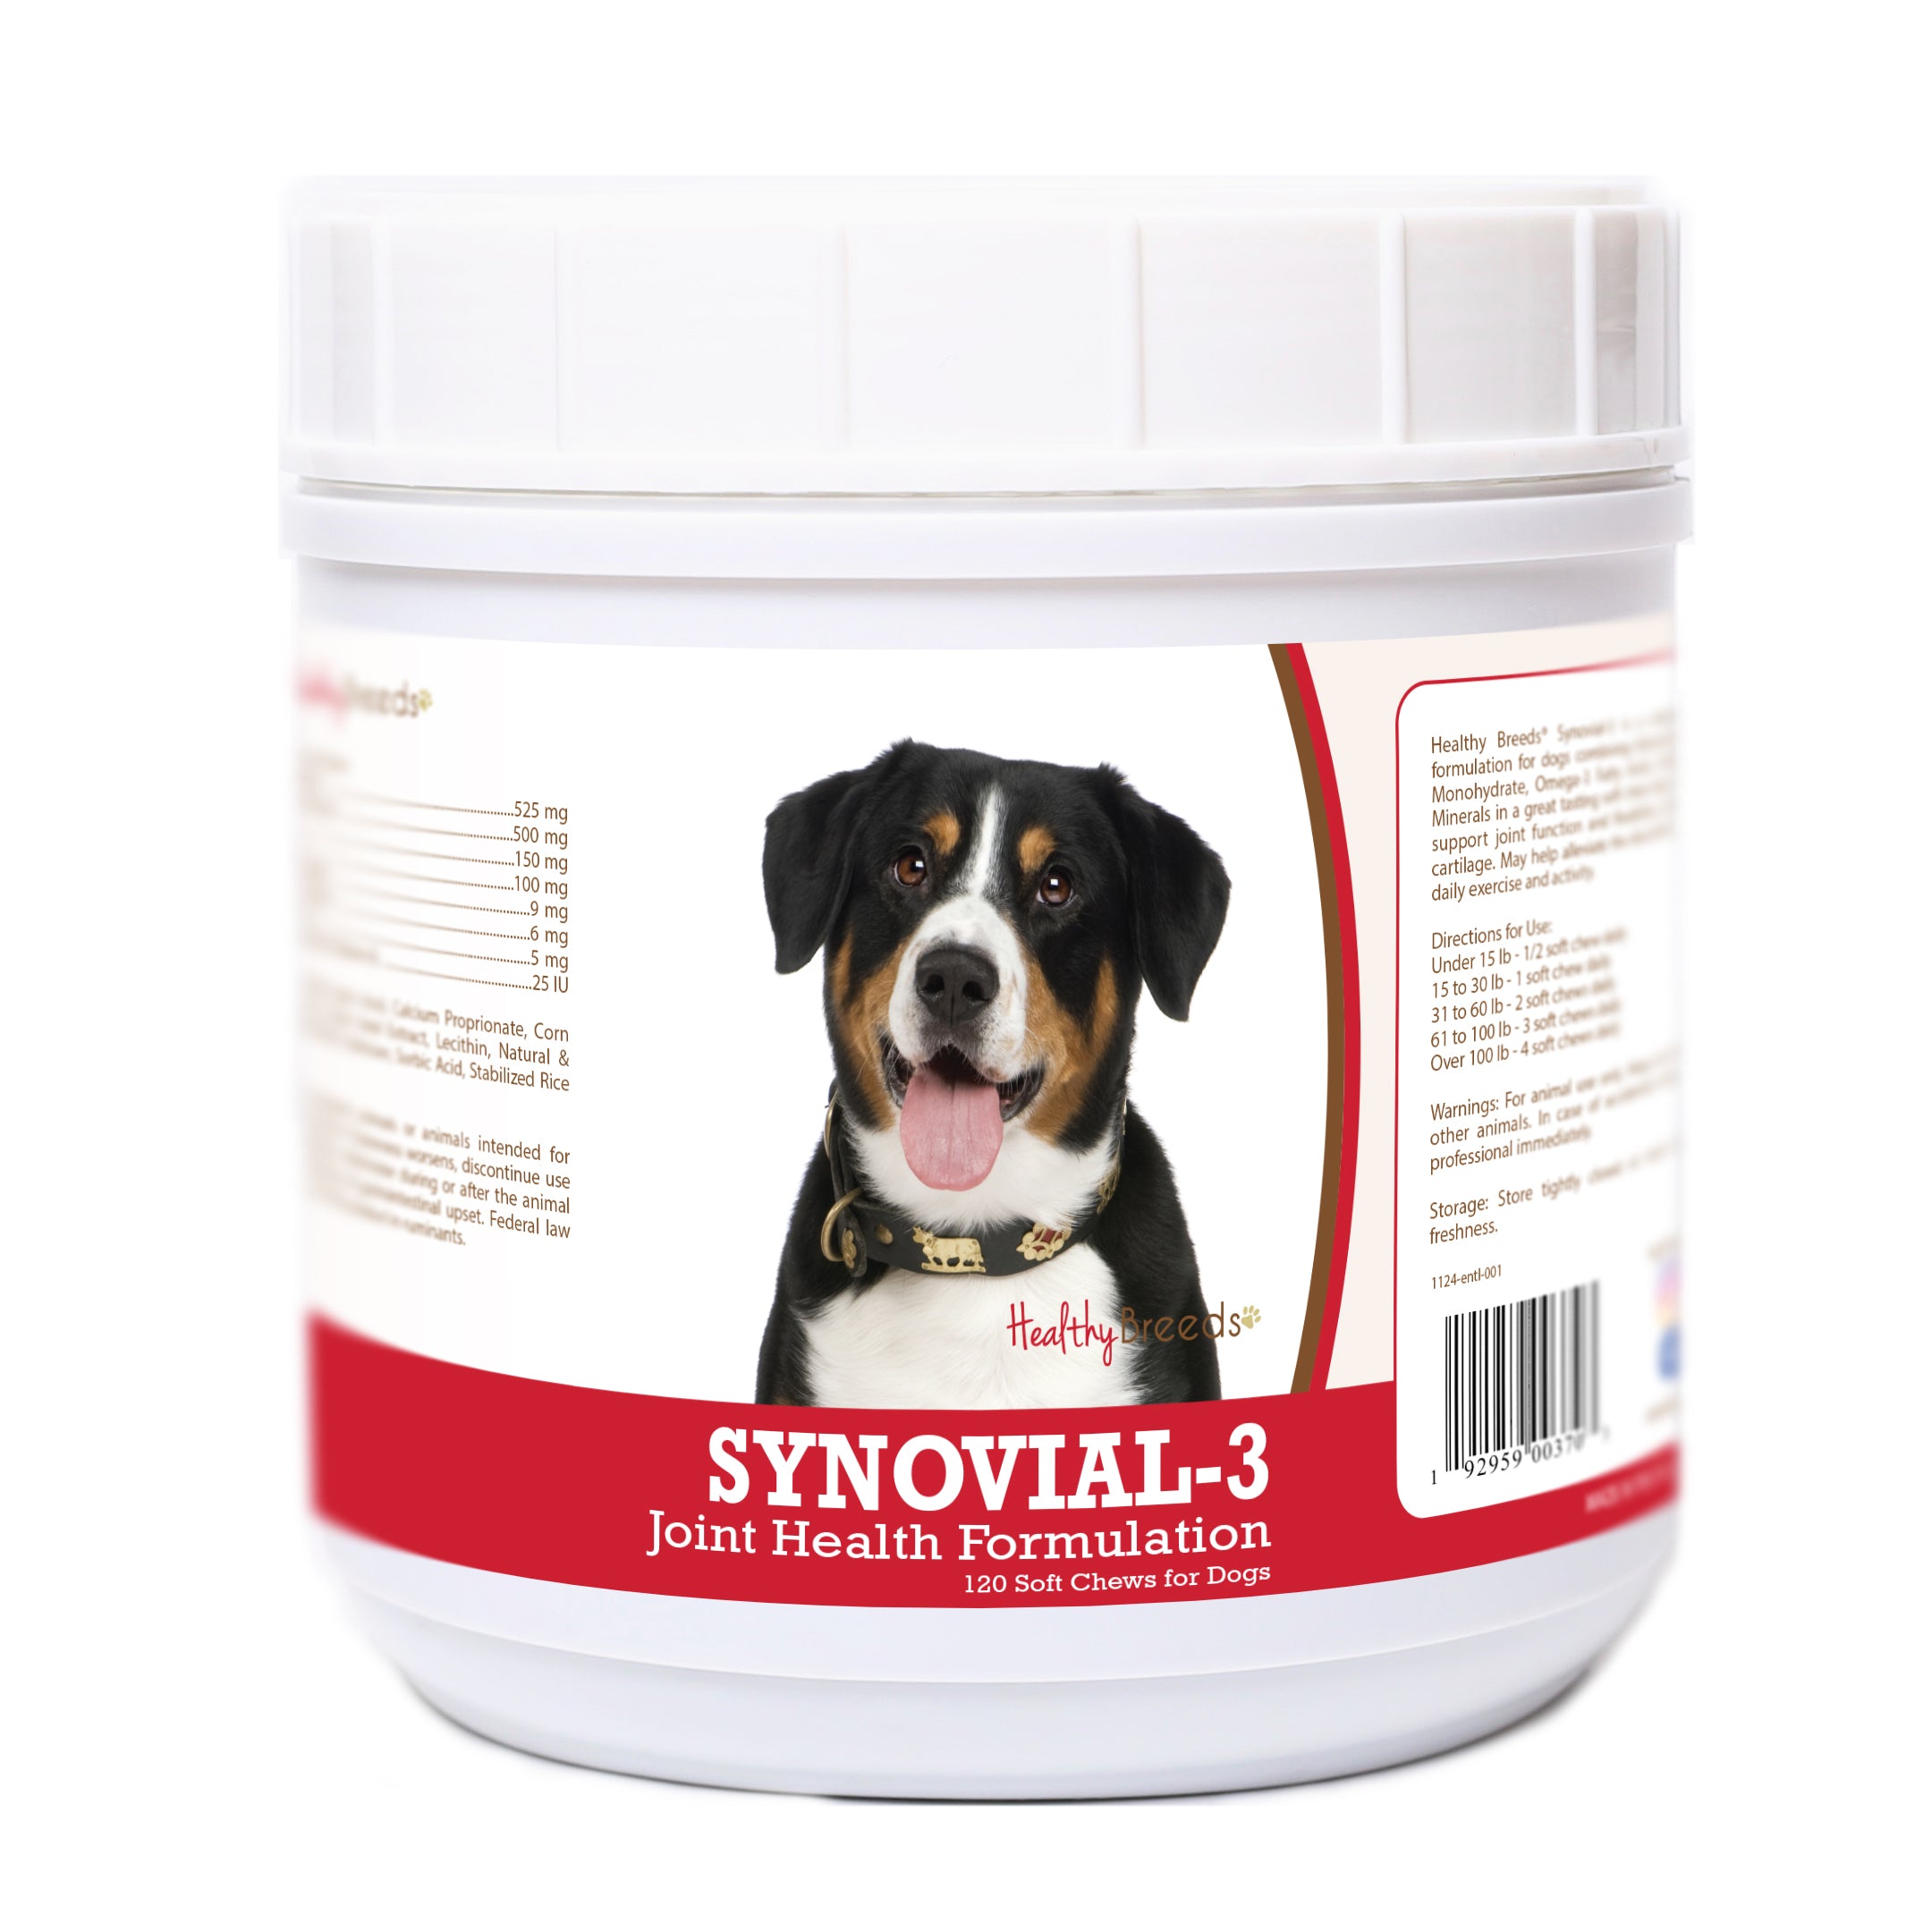 Entlebucher Mountain Dog Synovial-3 Joint Health Formulation Soft Chews 120 Count